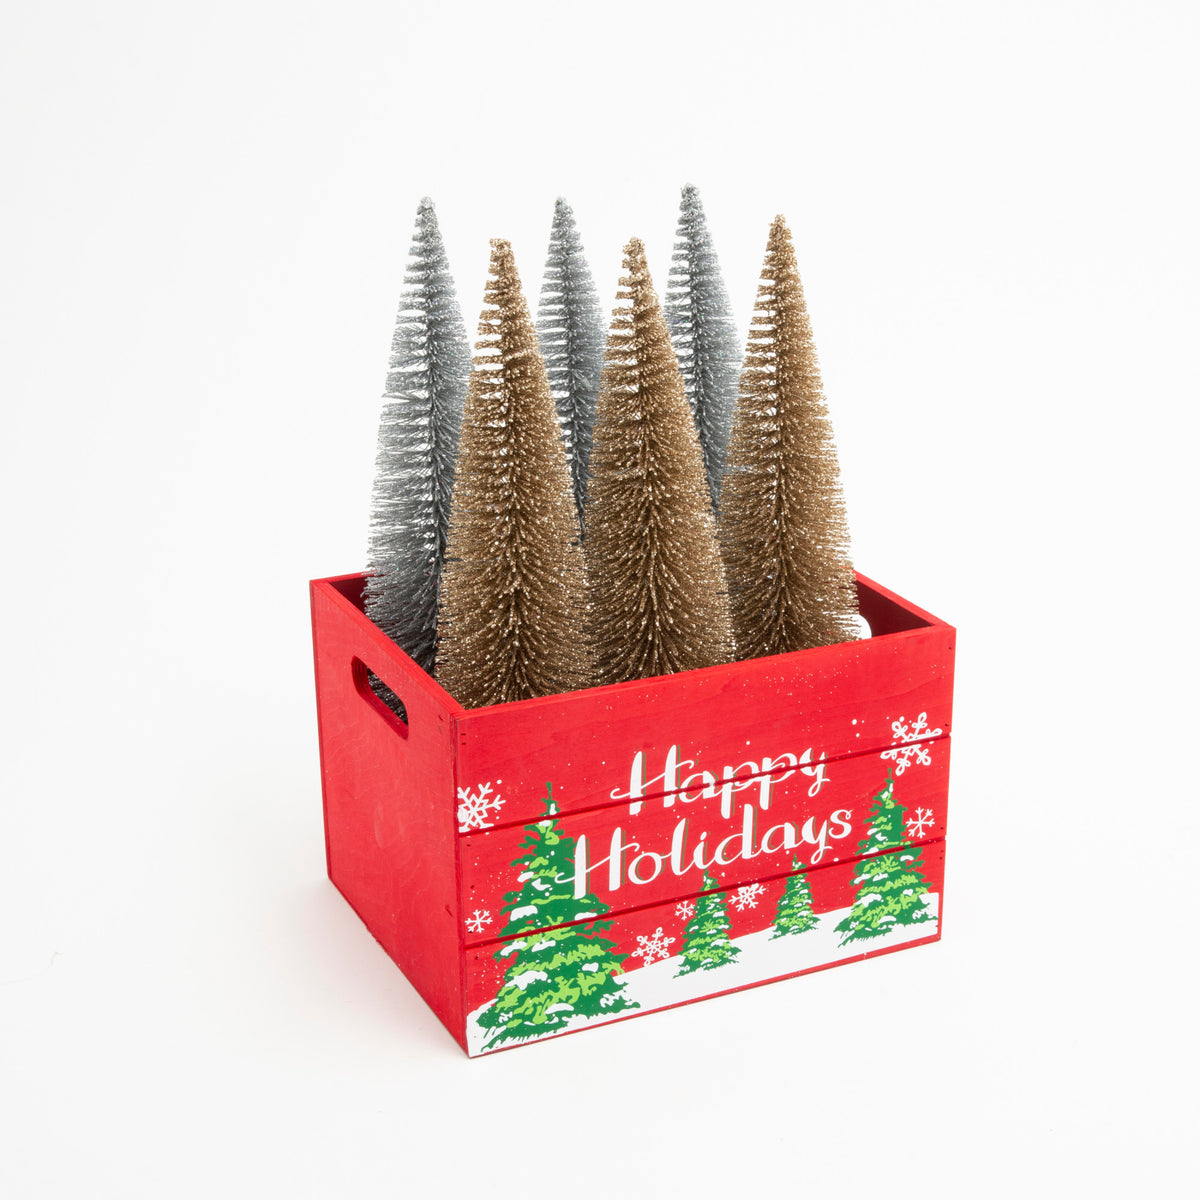 16"H Holiday Brush Trees in Box